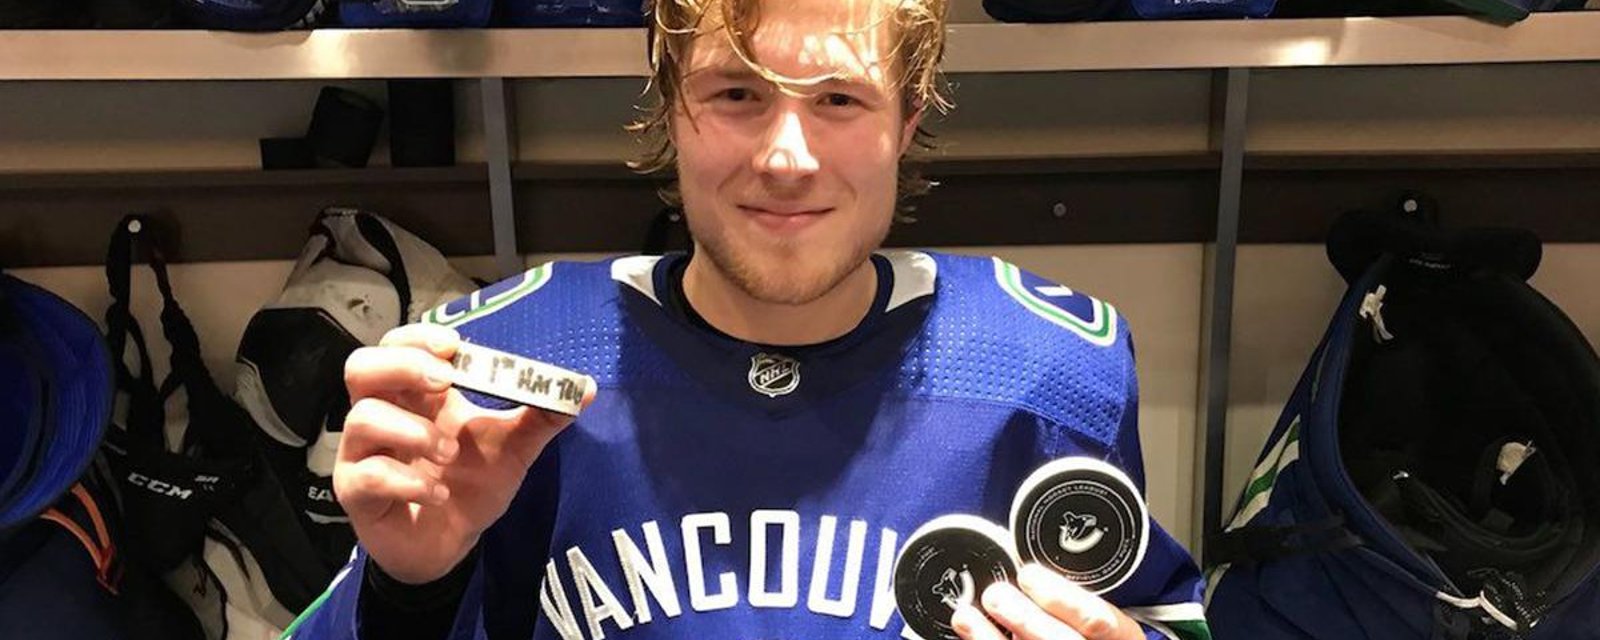 Boeser’s hat trick goal in Punjabi is a MUST SEE for every Canucks fan